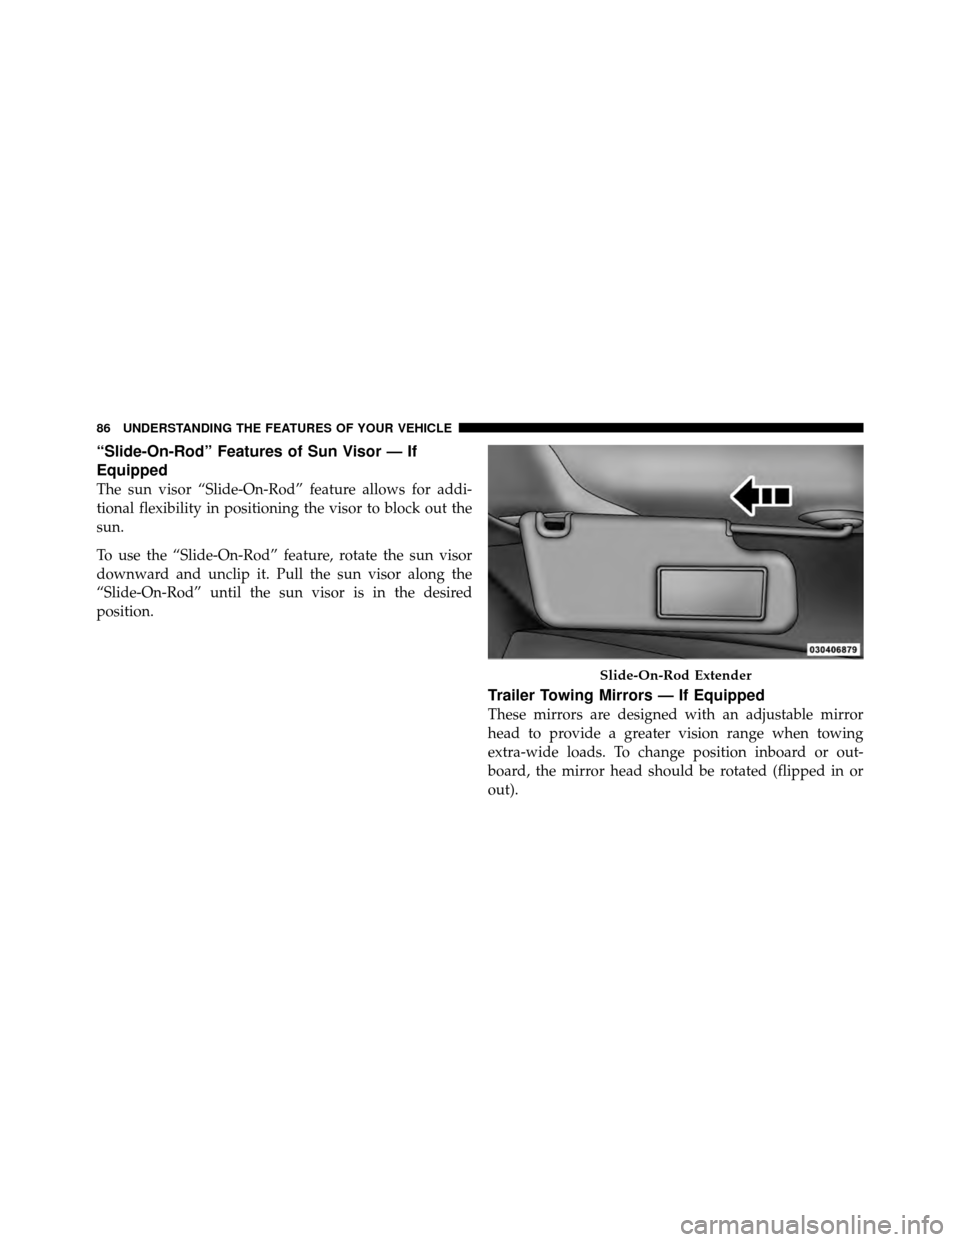 Ram 5500 Chassis Cab 2011 Manual Online “Slide-On-Rod” Features of Sun Visor — If
Equipped
The sun visor “Slide-On-Rod” feature allows for addi-
tional flexibility in positioning the visor to block out the
sun.
To use the “Slide